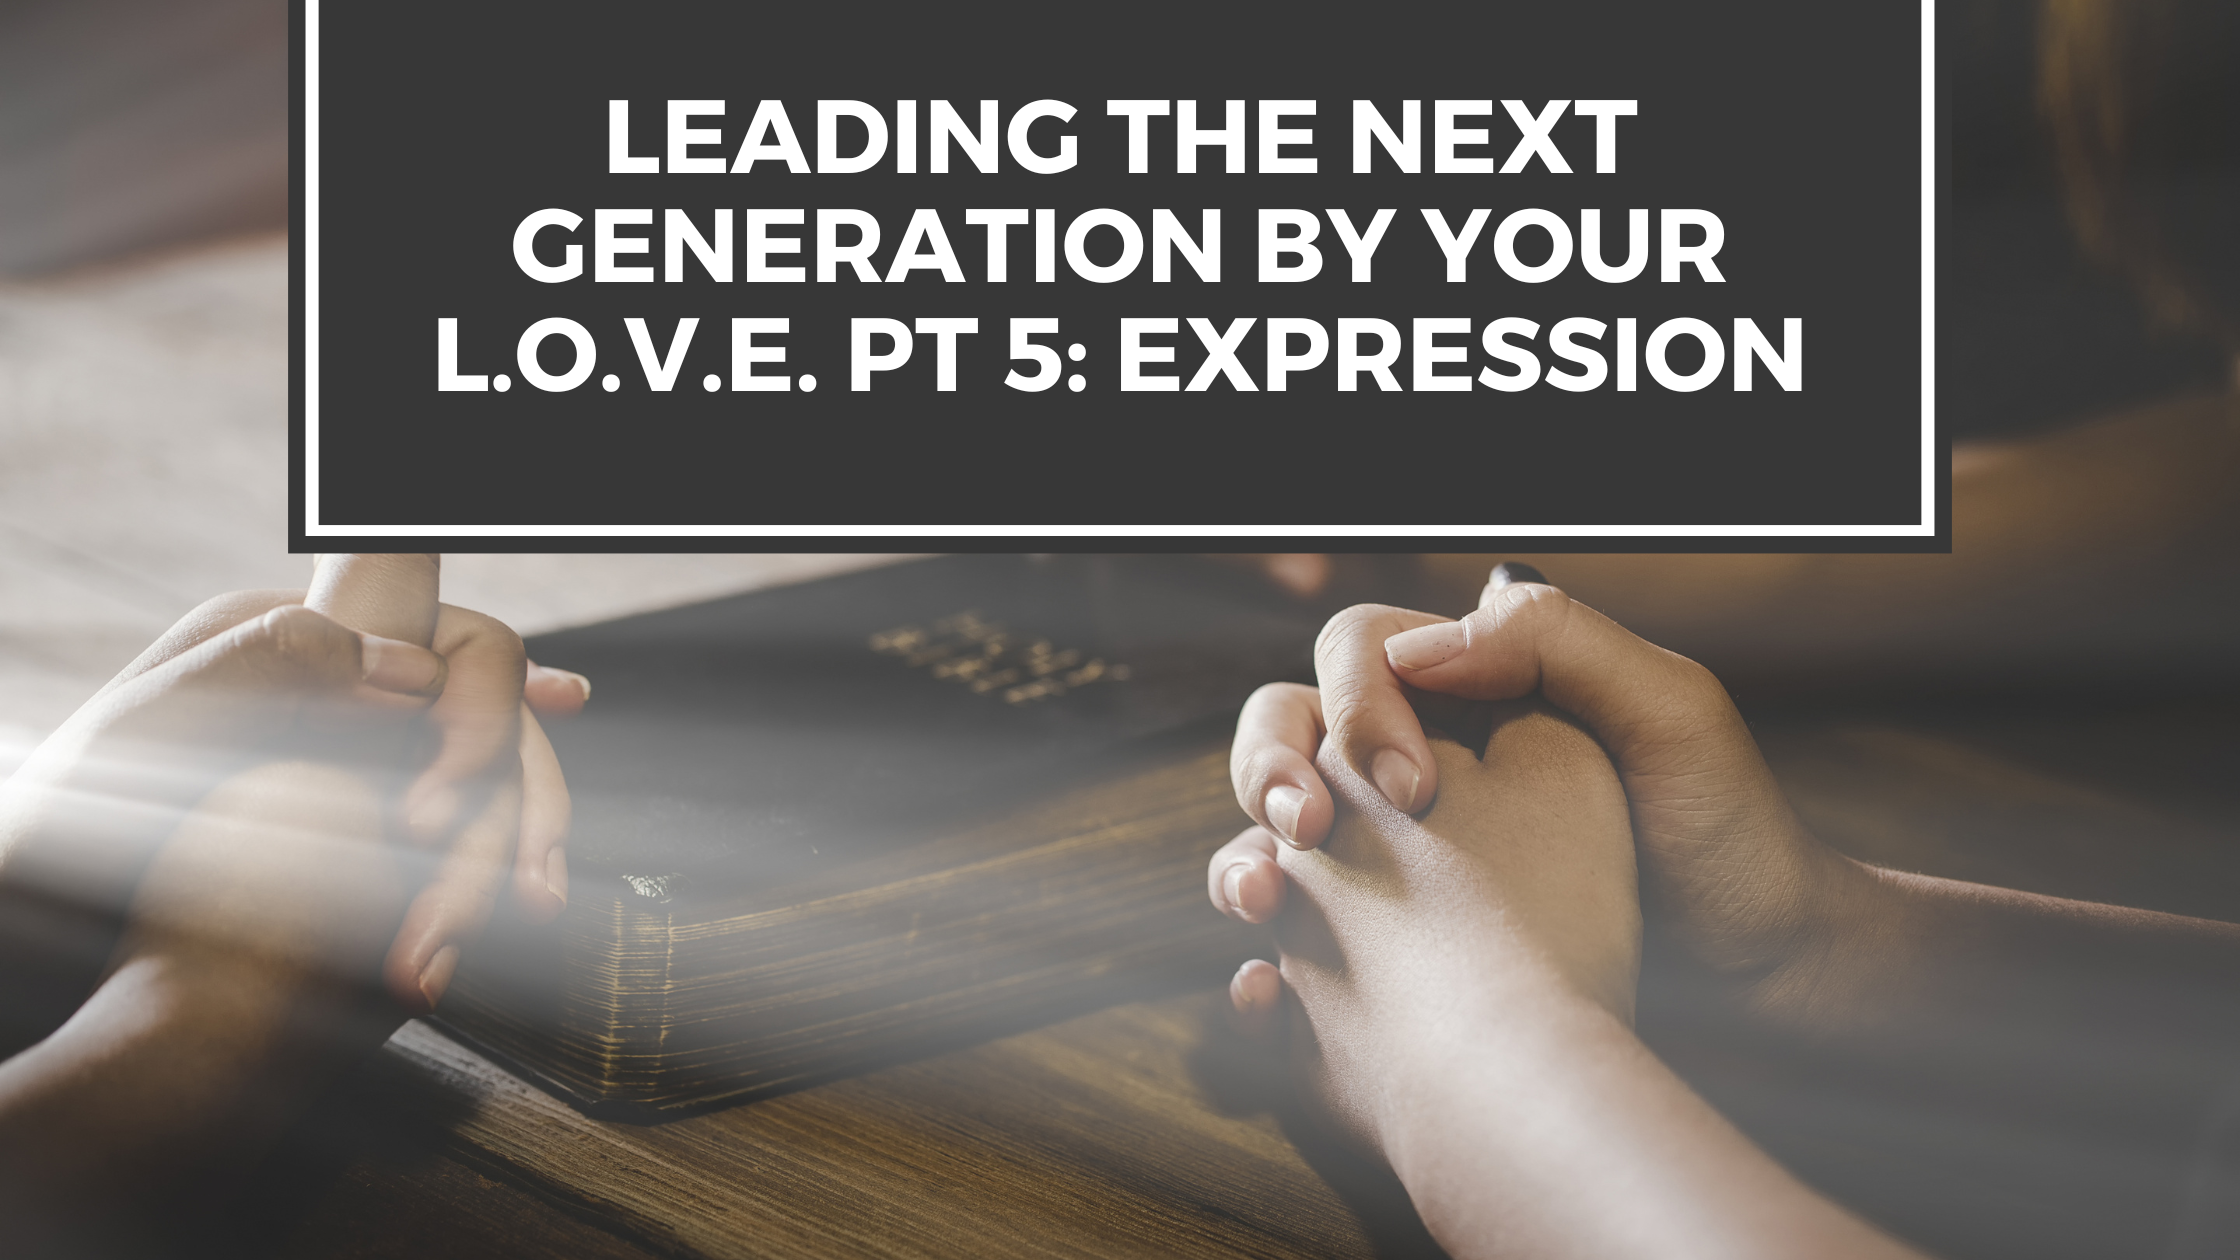 Leading the Next Generation by Your LOVE Pt. 5: Expression blog title